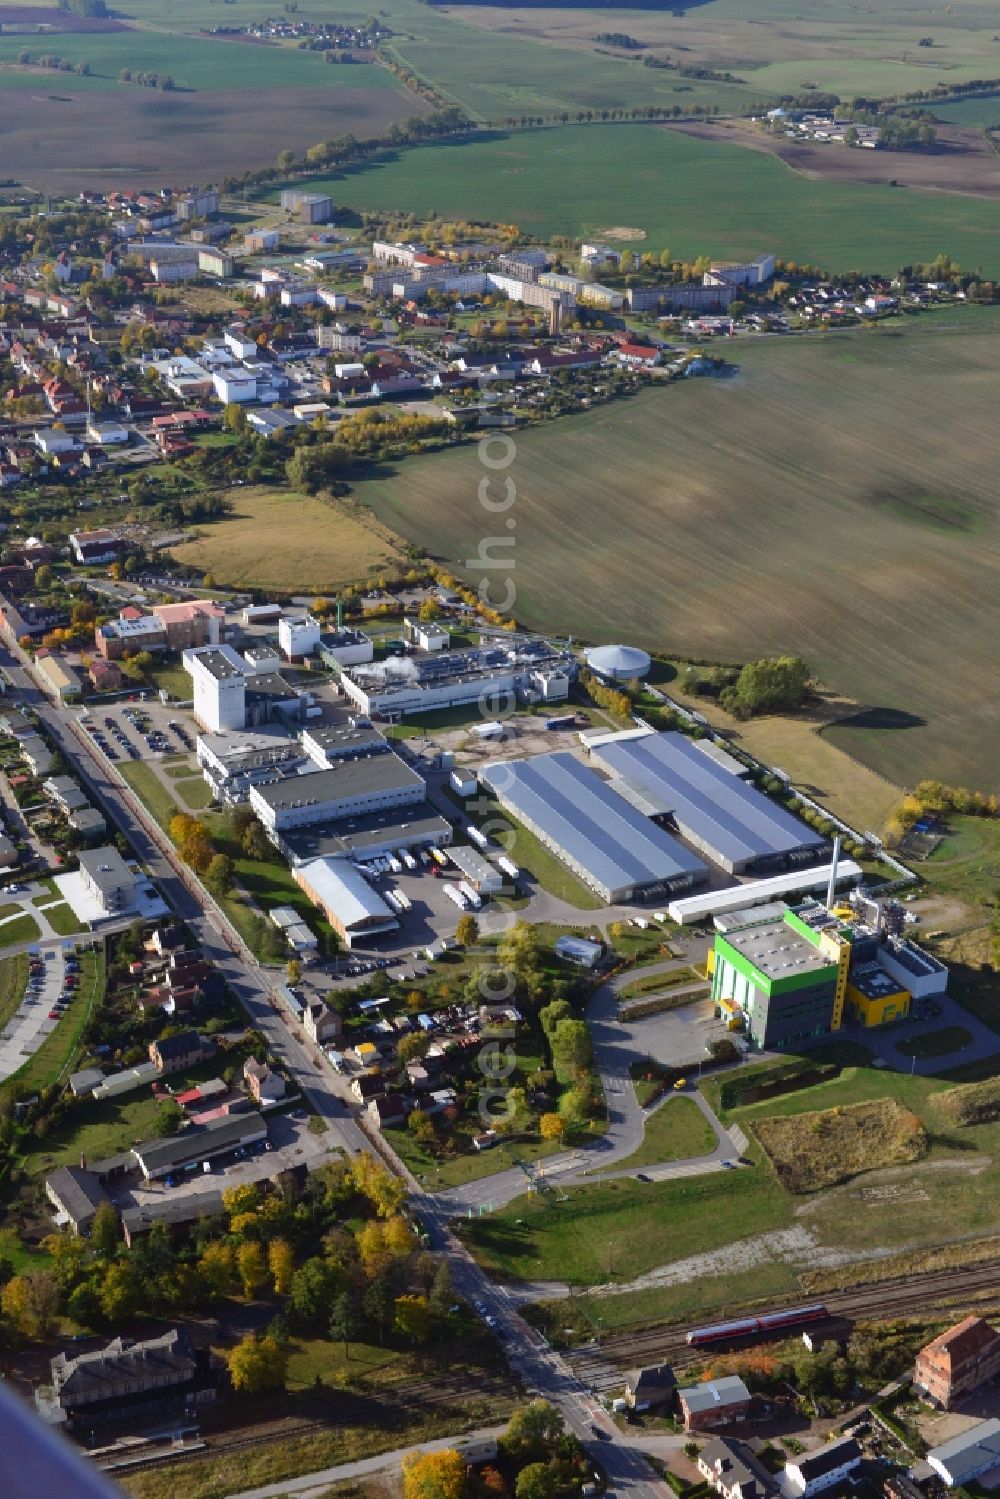 Stavenhagen from above - View at the Pfanni factory premises and the company own power plant in Stavenhagen in the federal state Mecklenburg-Vorpommern. The Pfanni GmbH & Co. OHG is a German food company headquartered in Stavenhagen, which is specialized in the manufacture of kitchen-ready potato products. The power plant was built for the power and heating supply of the Pfanni company and is operated with alternative fuels. Operator is the Nehlsen Heizkraftwerke GmbH & Co.KG